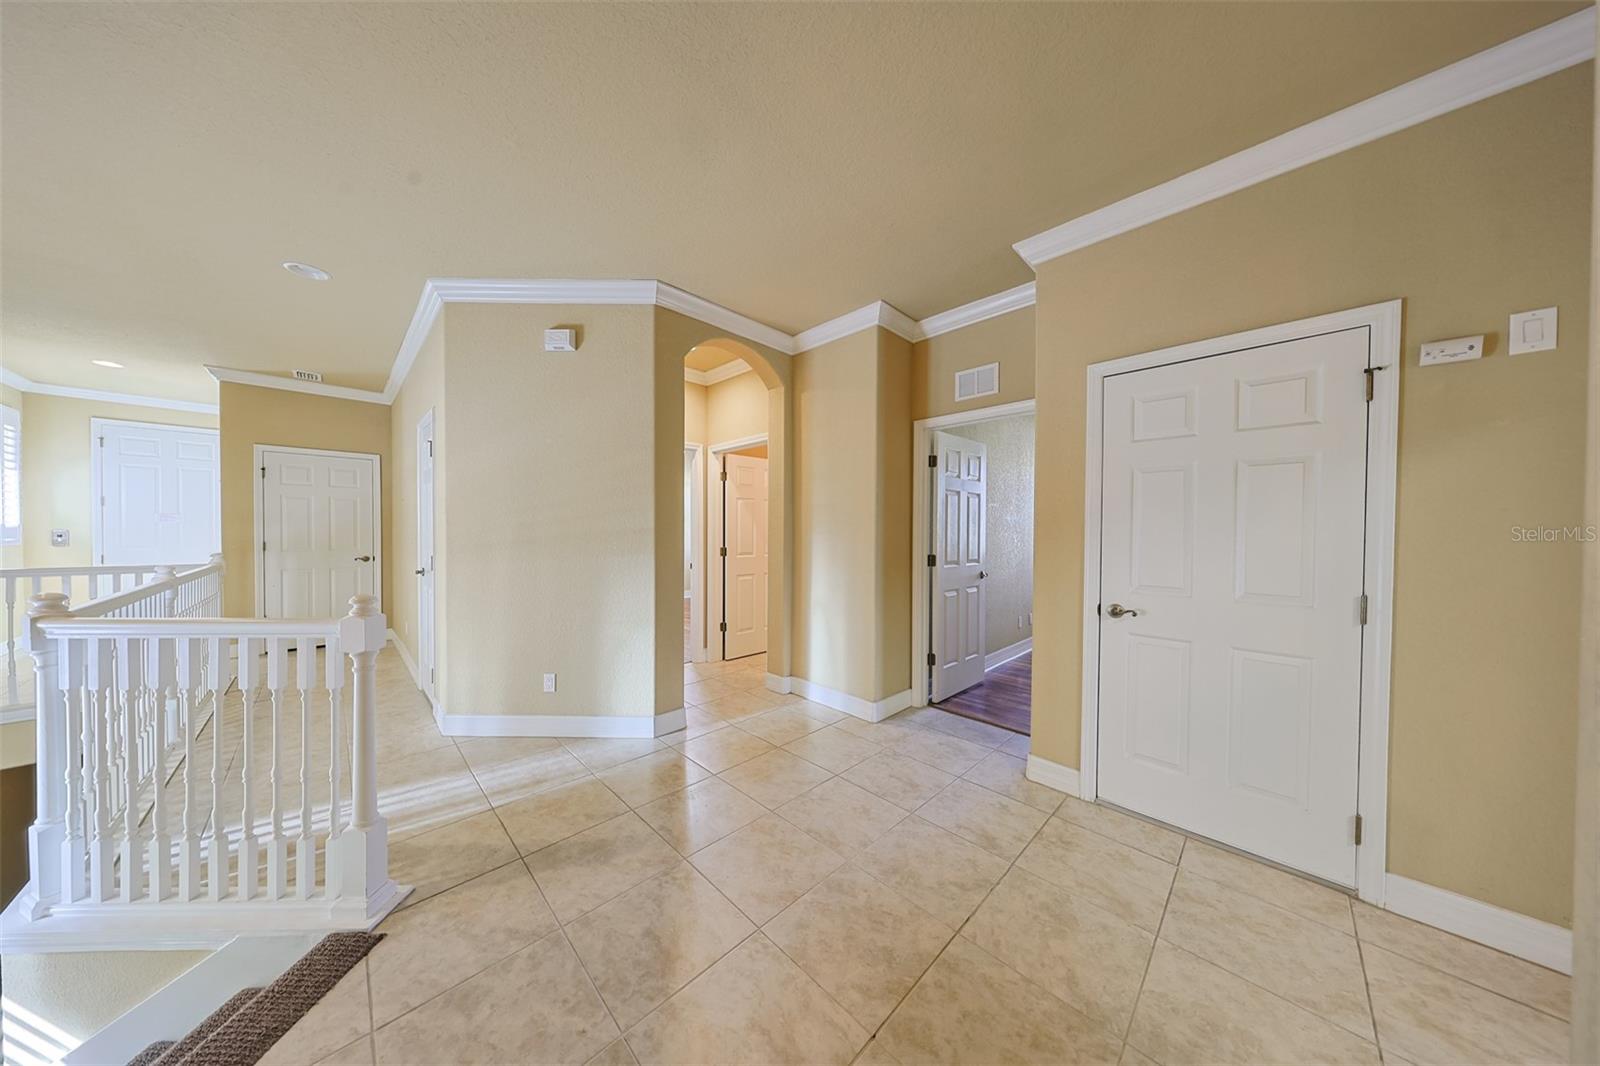 View of the foyer entrance and split floor plan bedrooms and guest bath to the right. In the far back left is the private elevator that comes from the garage. Notice the attractive crown molding that match the handrail.